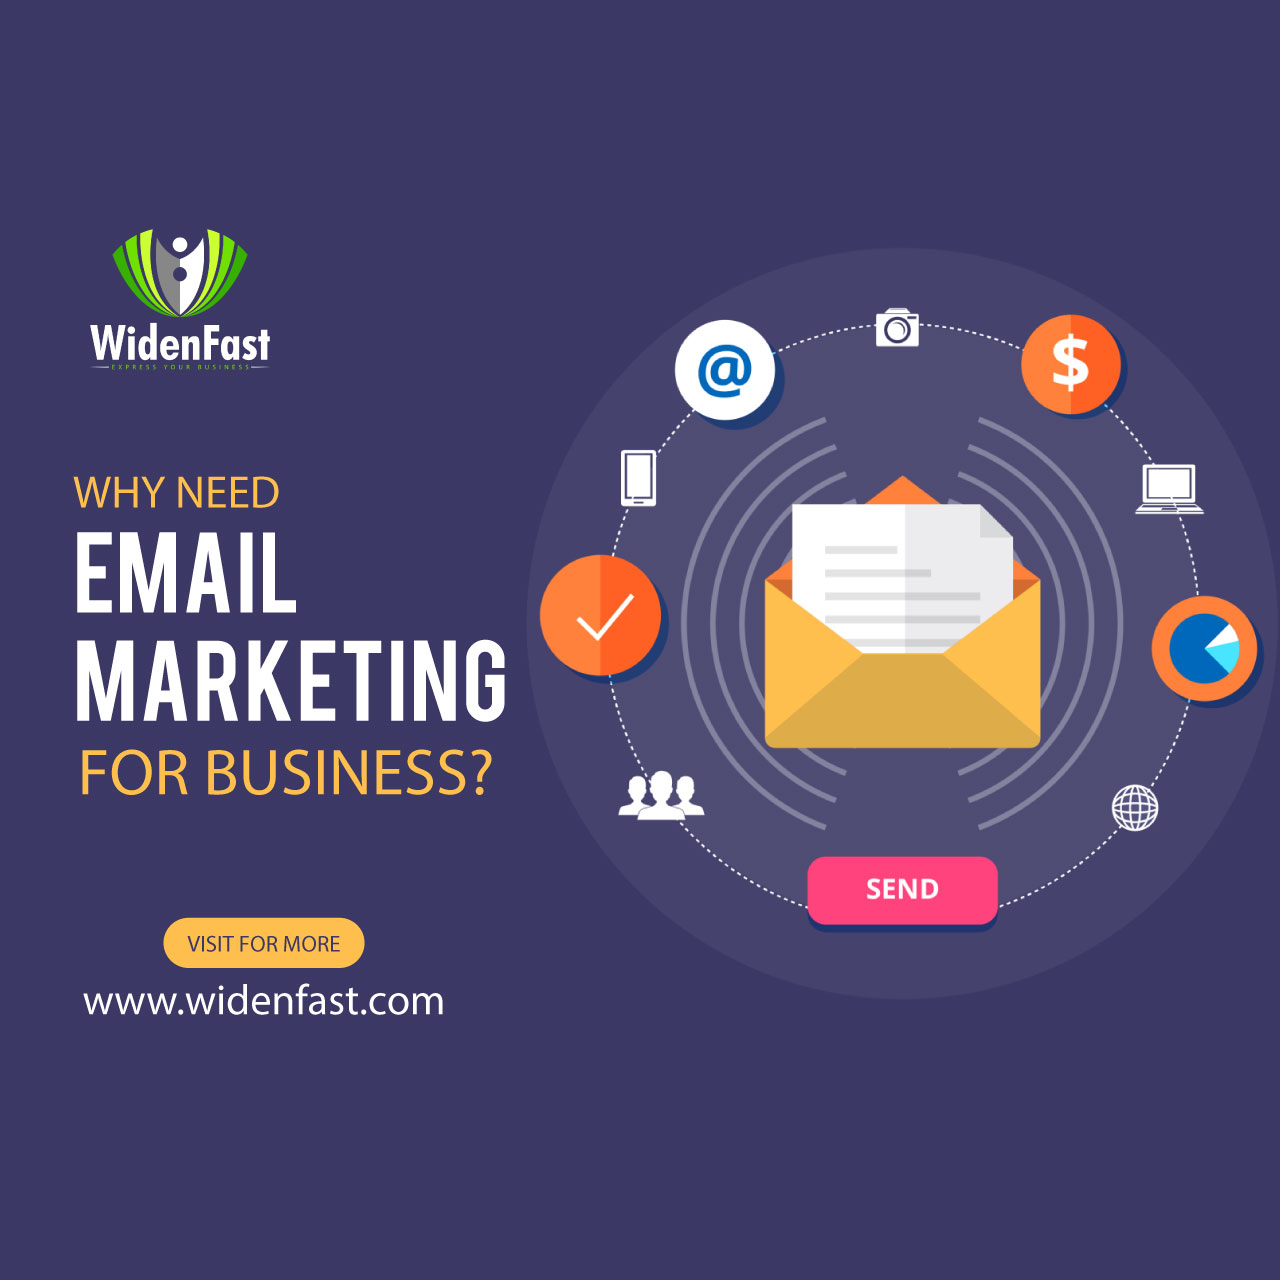 Why need Email marketing for business?